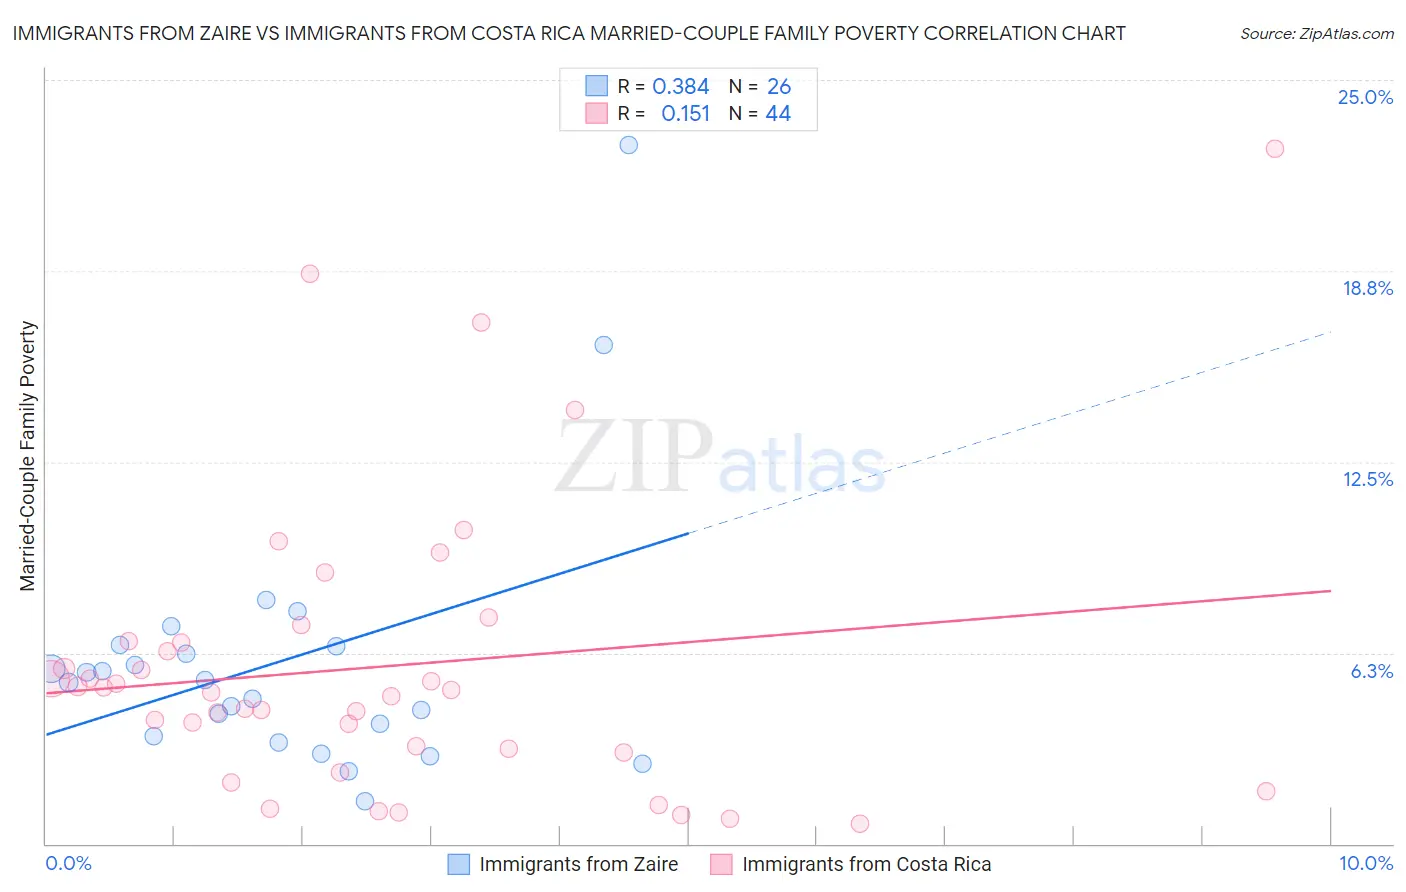 Immigrants from Zaire vs Immigrants from Costa Rica Married-Couple Family Poverty